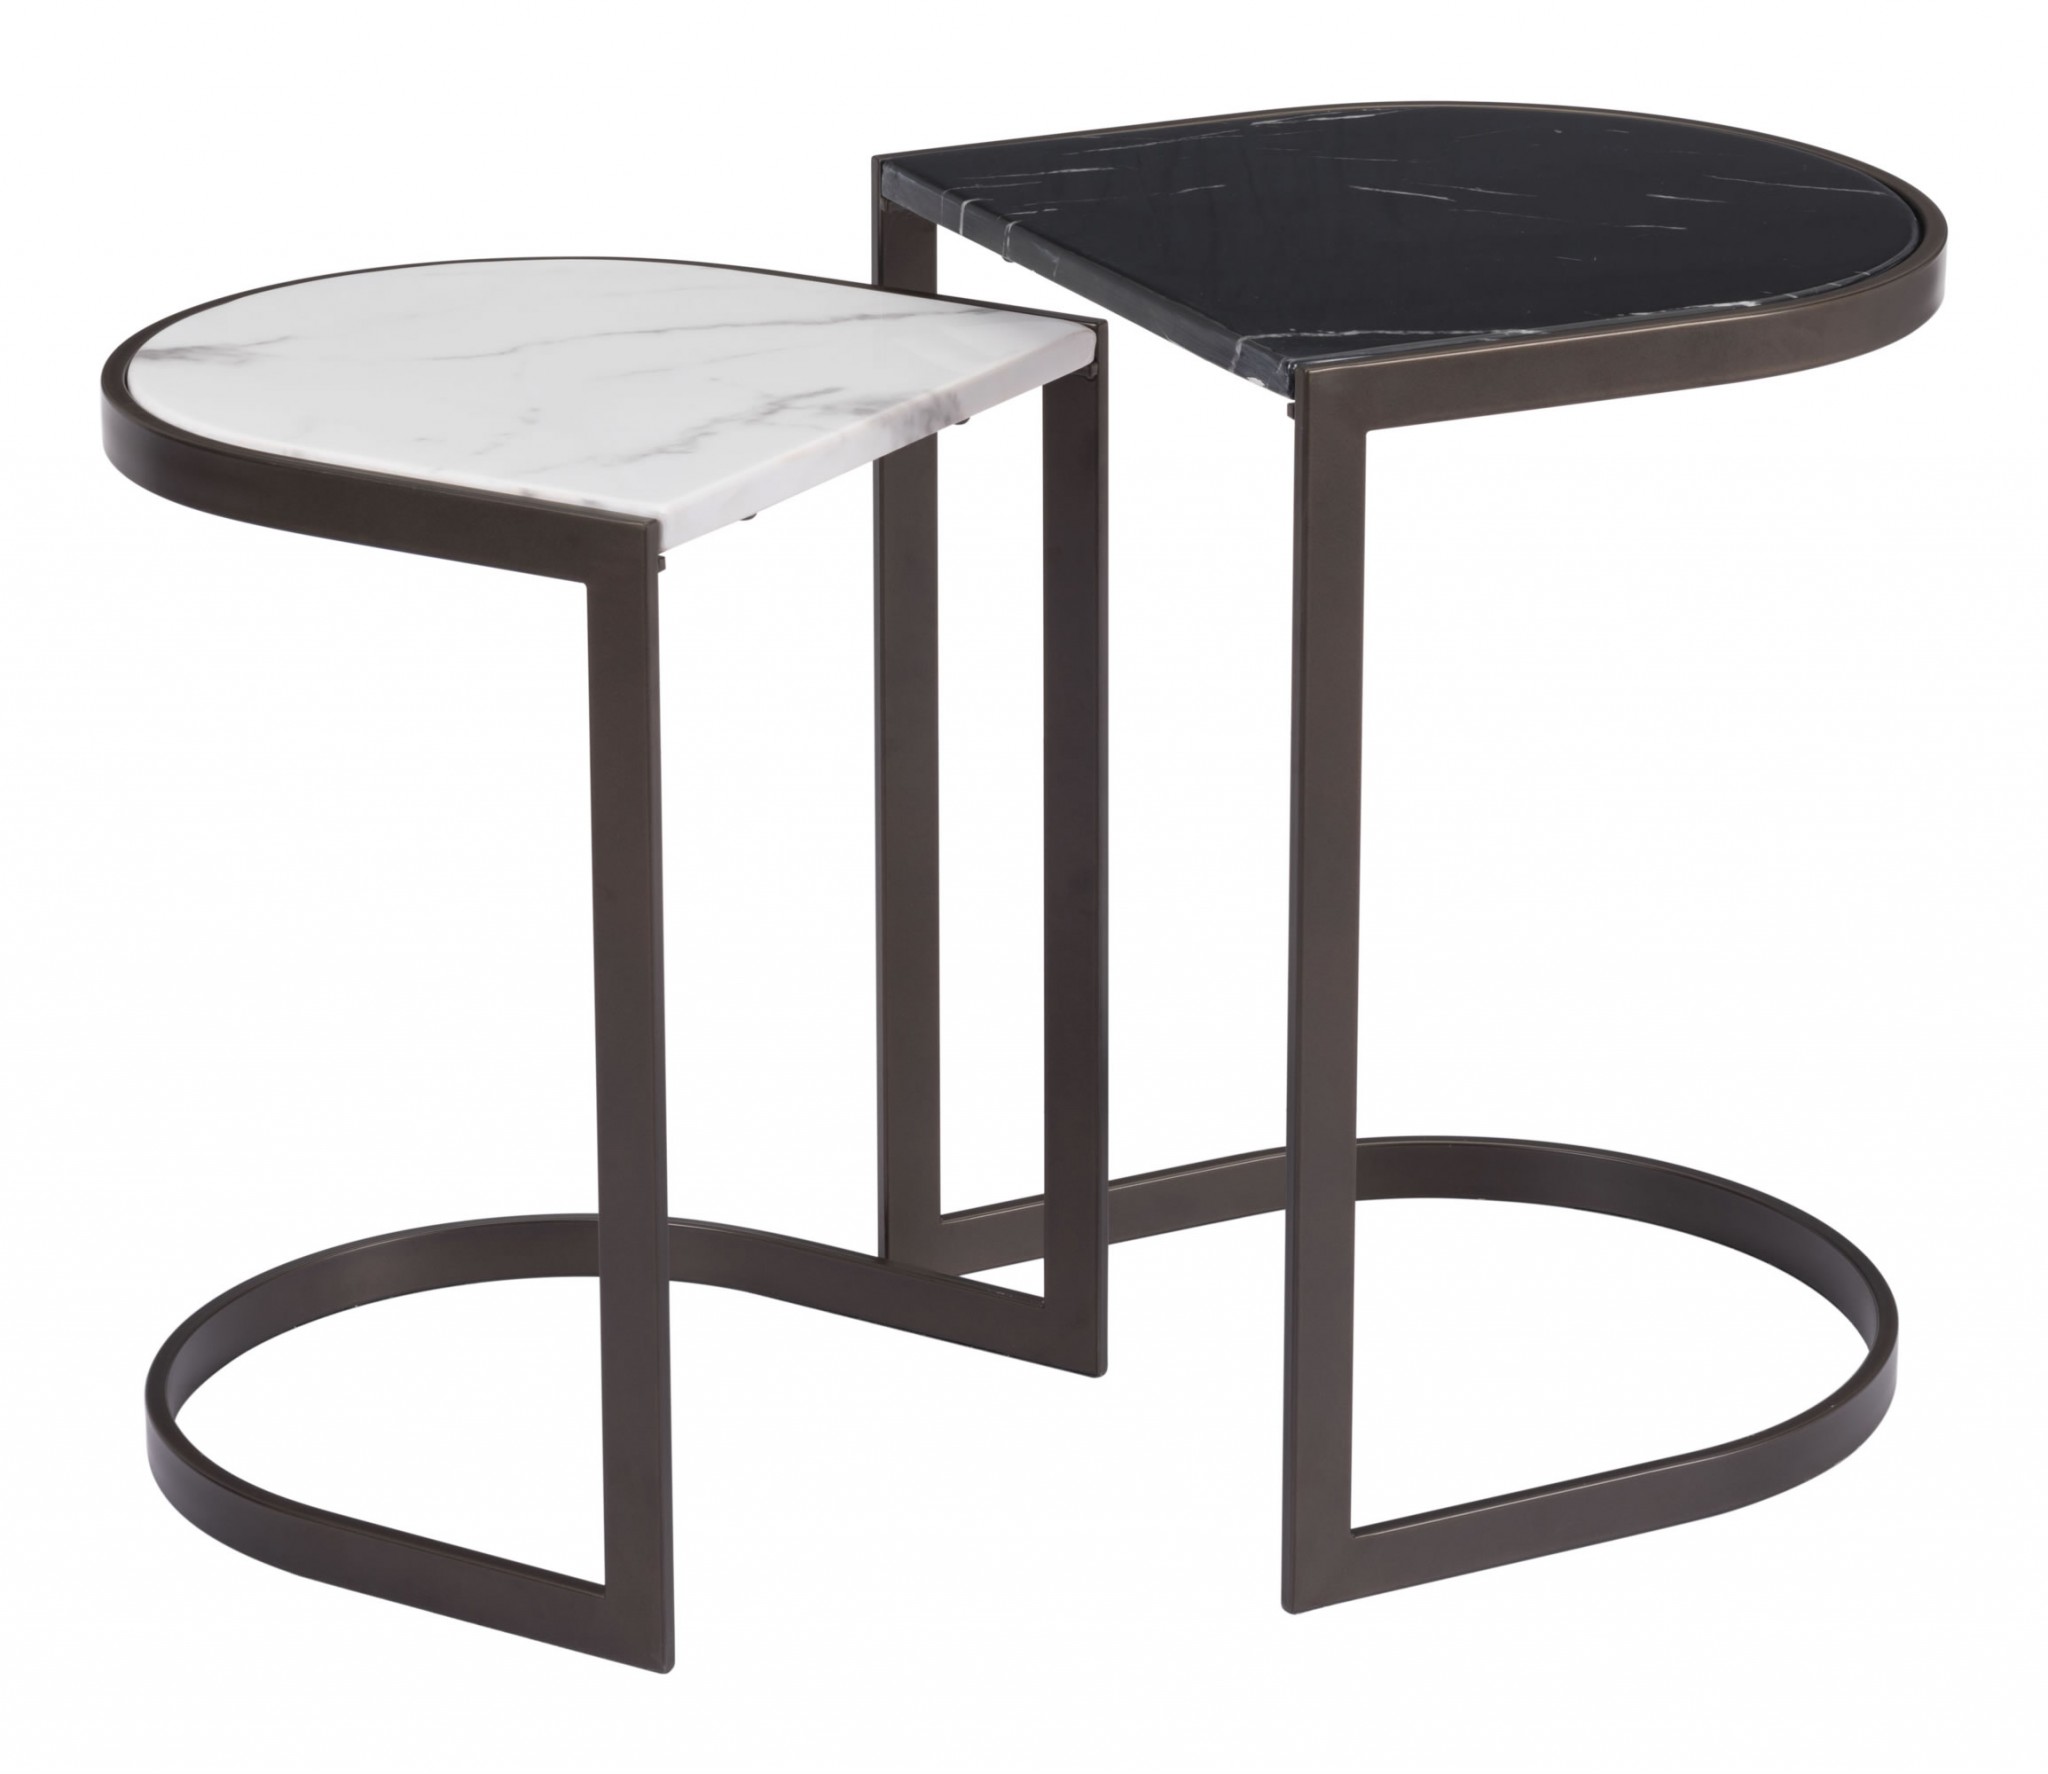 16.1" x 16.1" x 22" Black Stone & Antique Brass, Faux Marble, Steel, Nesting End Tables